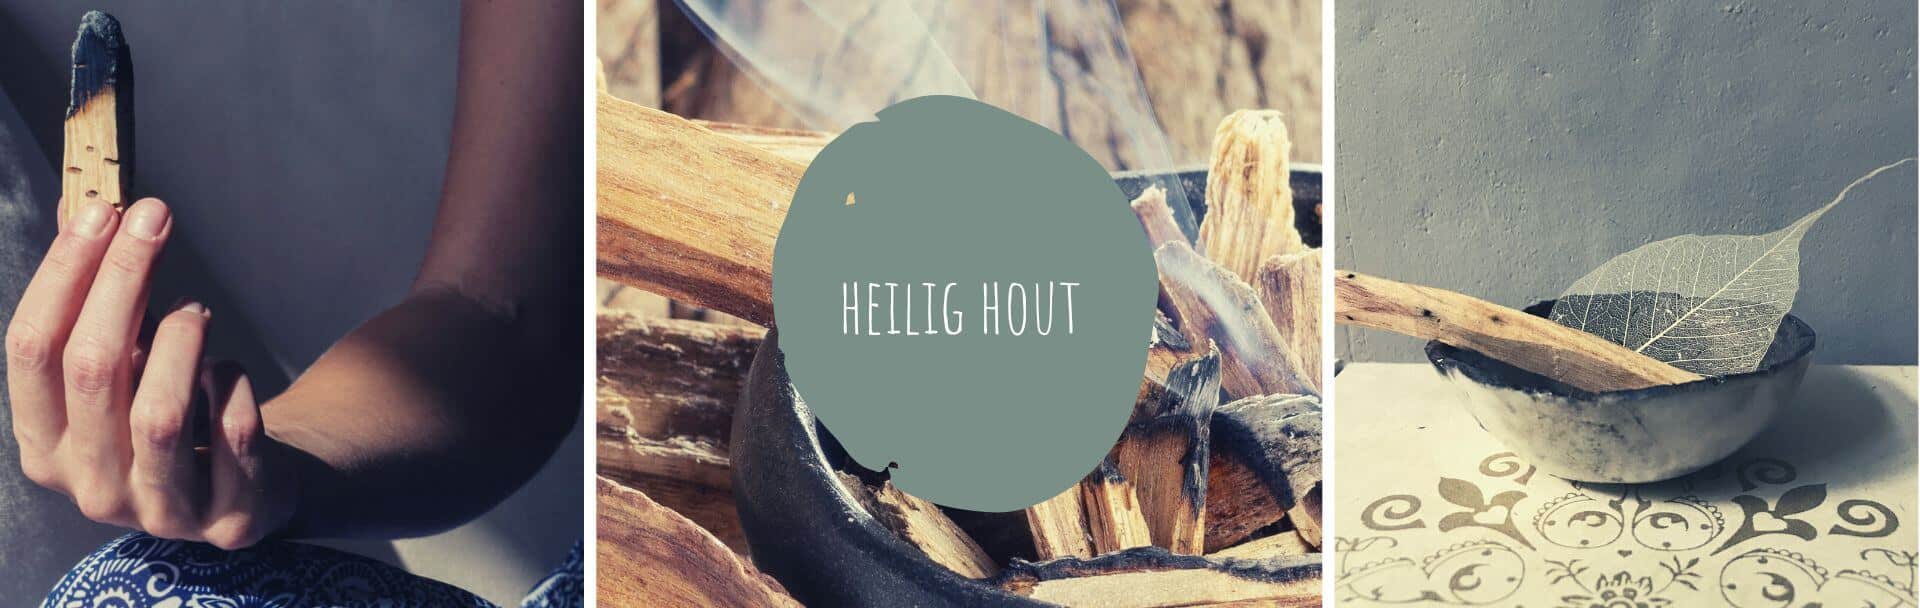 Happy to Share | Cheery Posry | Heilig Hout